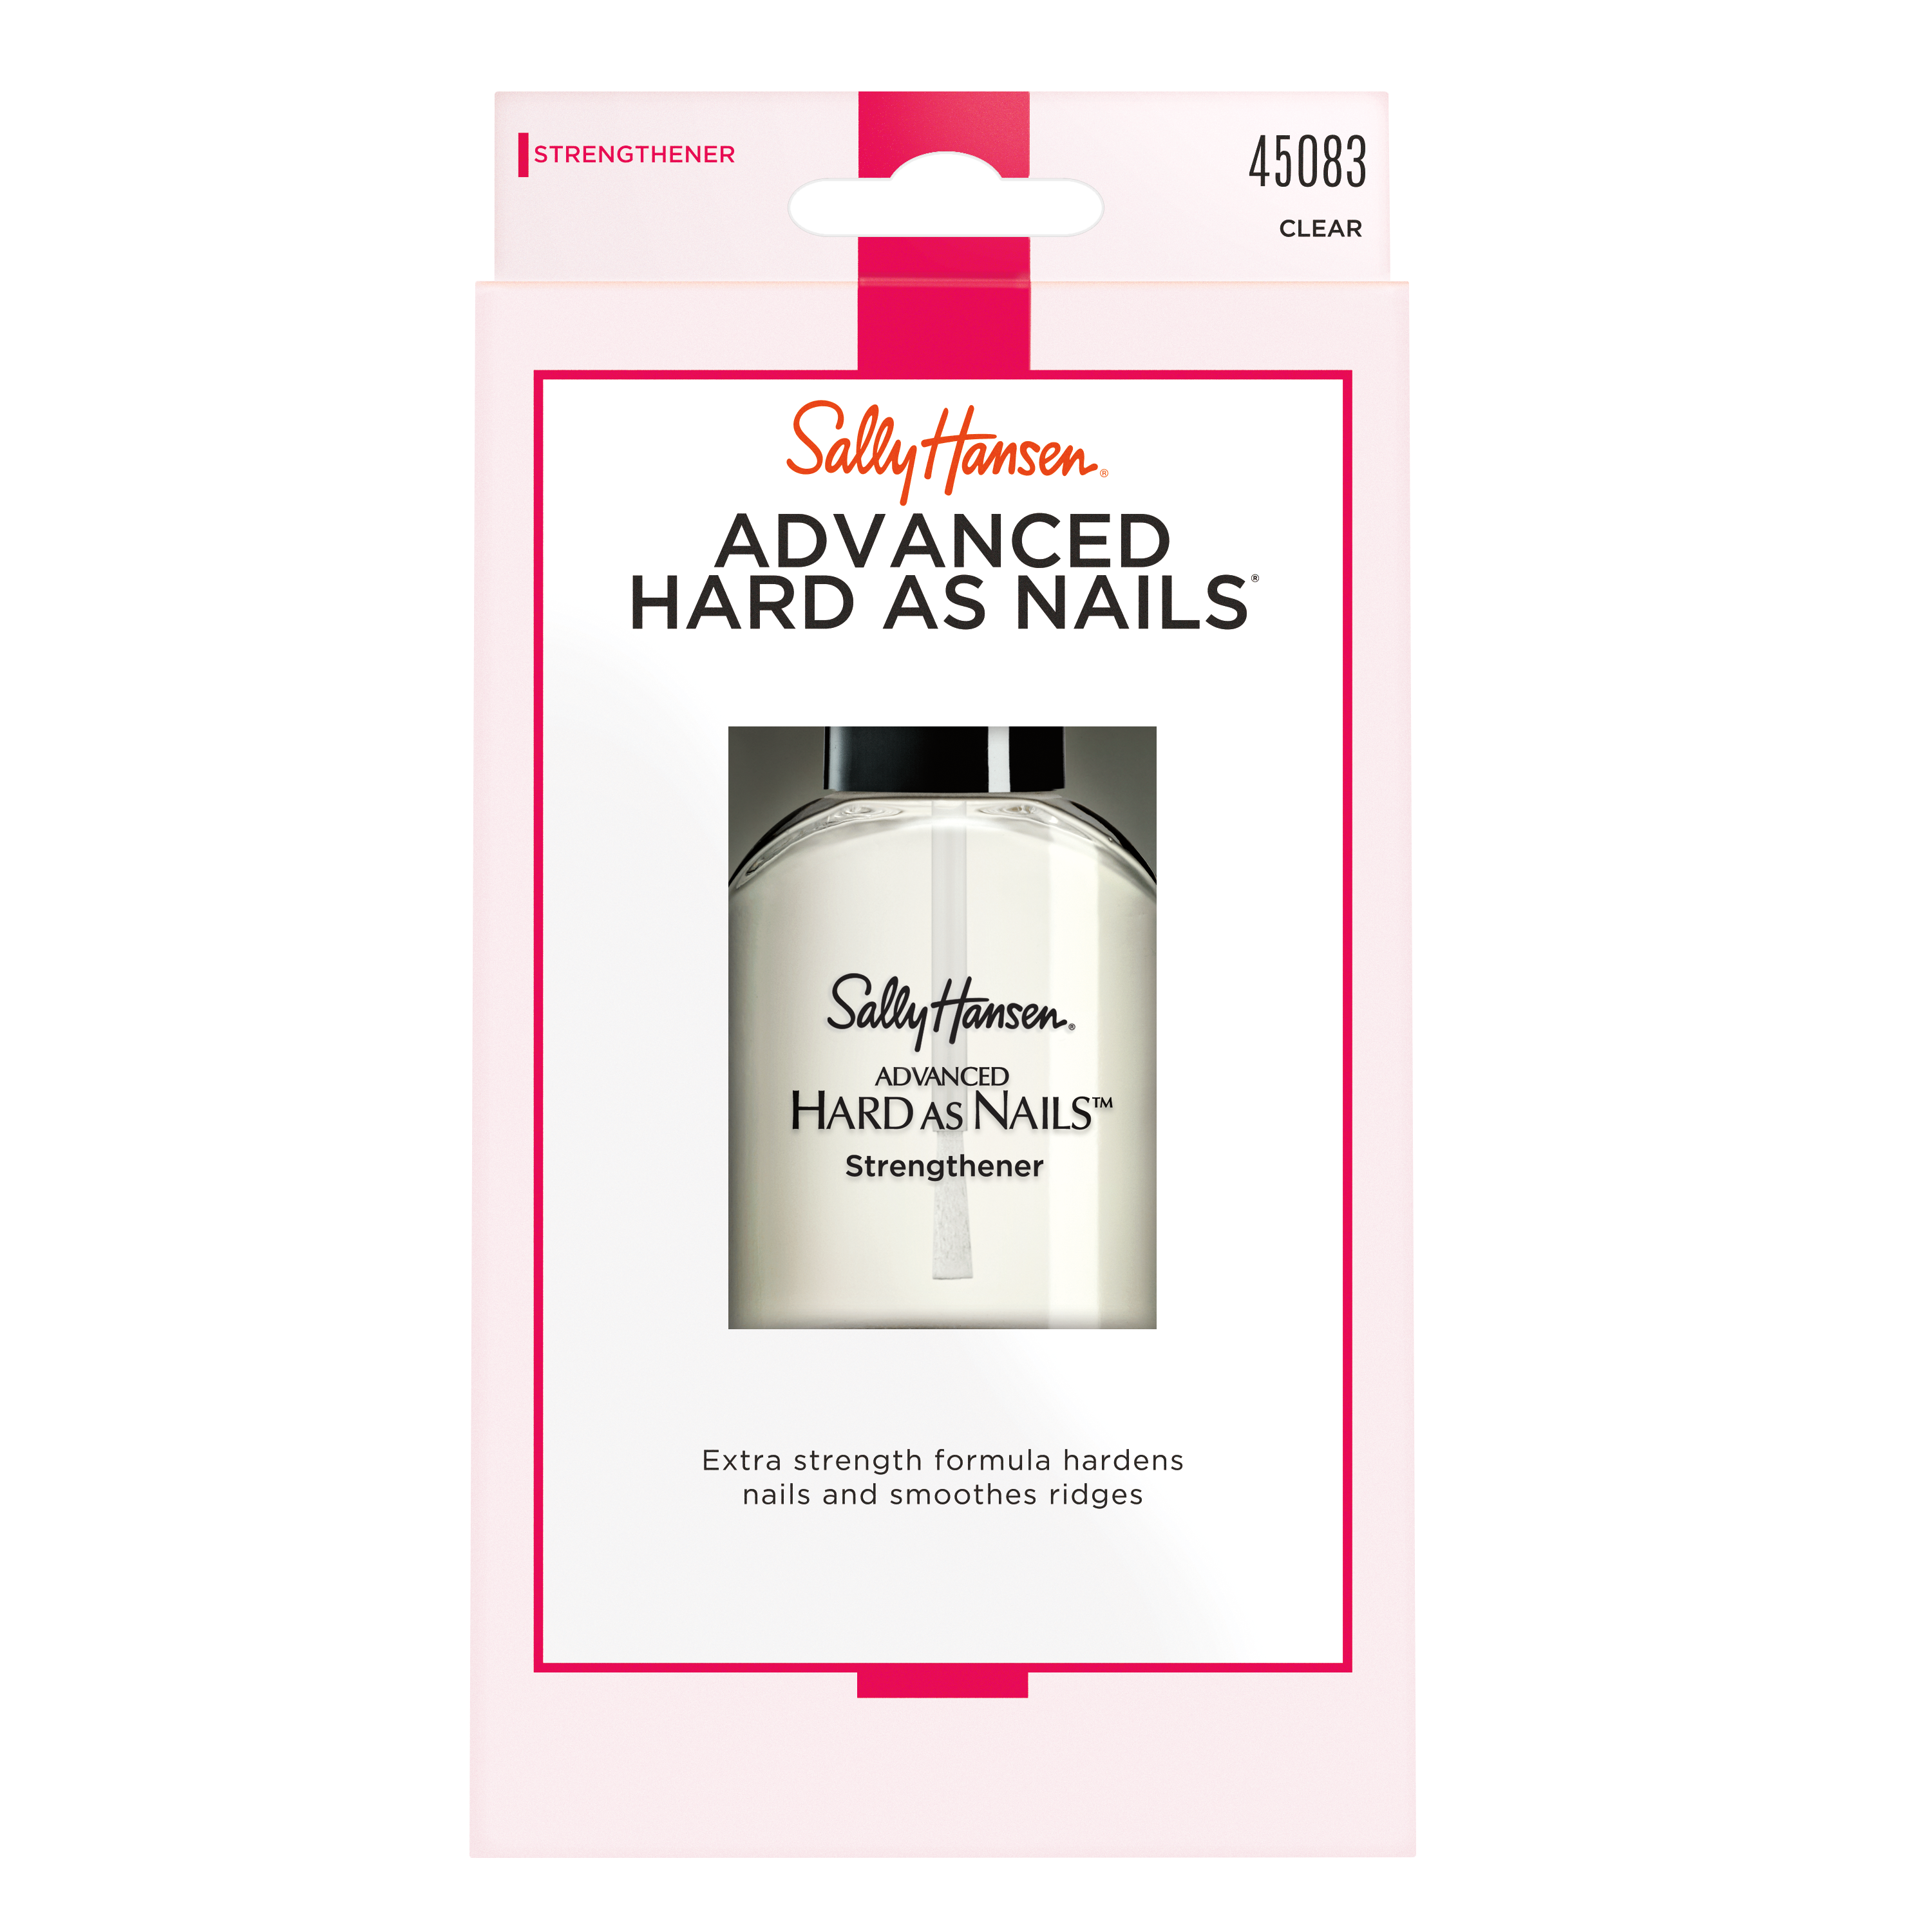 Sally Hansen Advanced Hard as Nails Strengthener, Clear - image 1 of 9